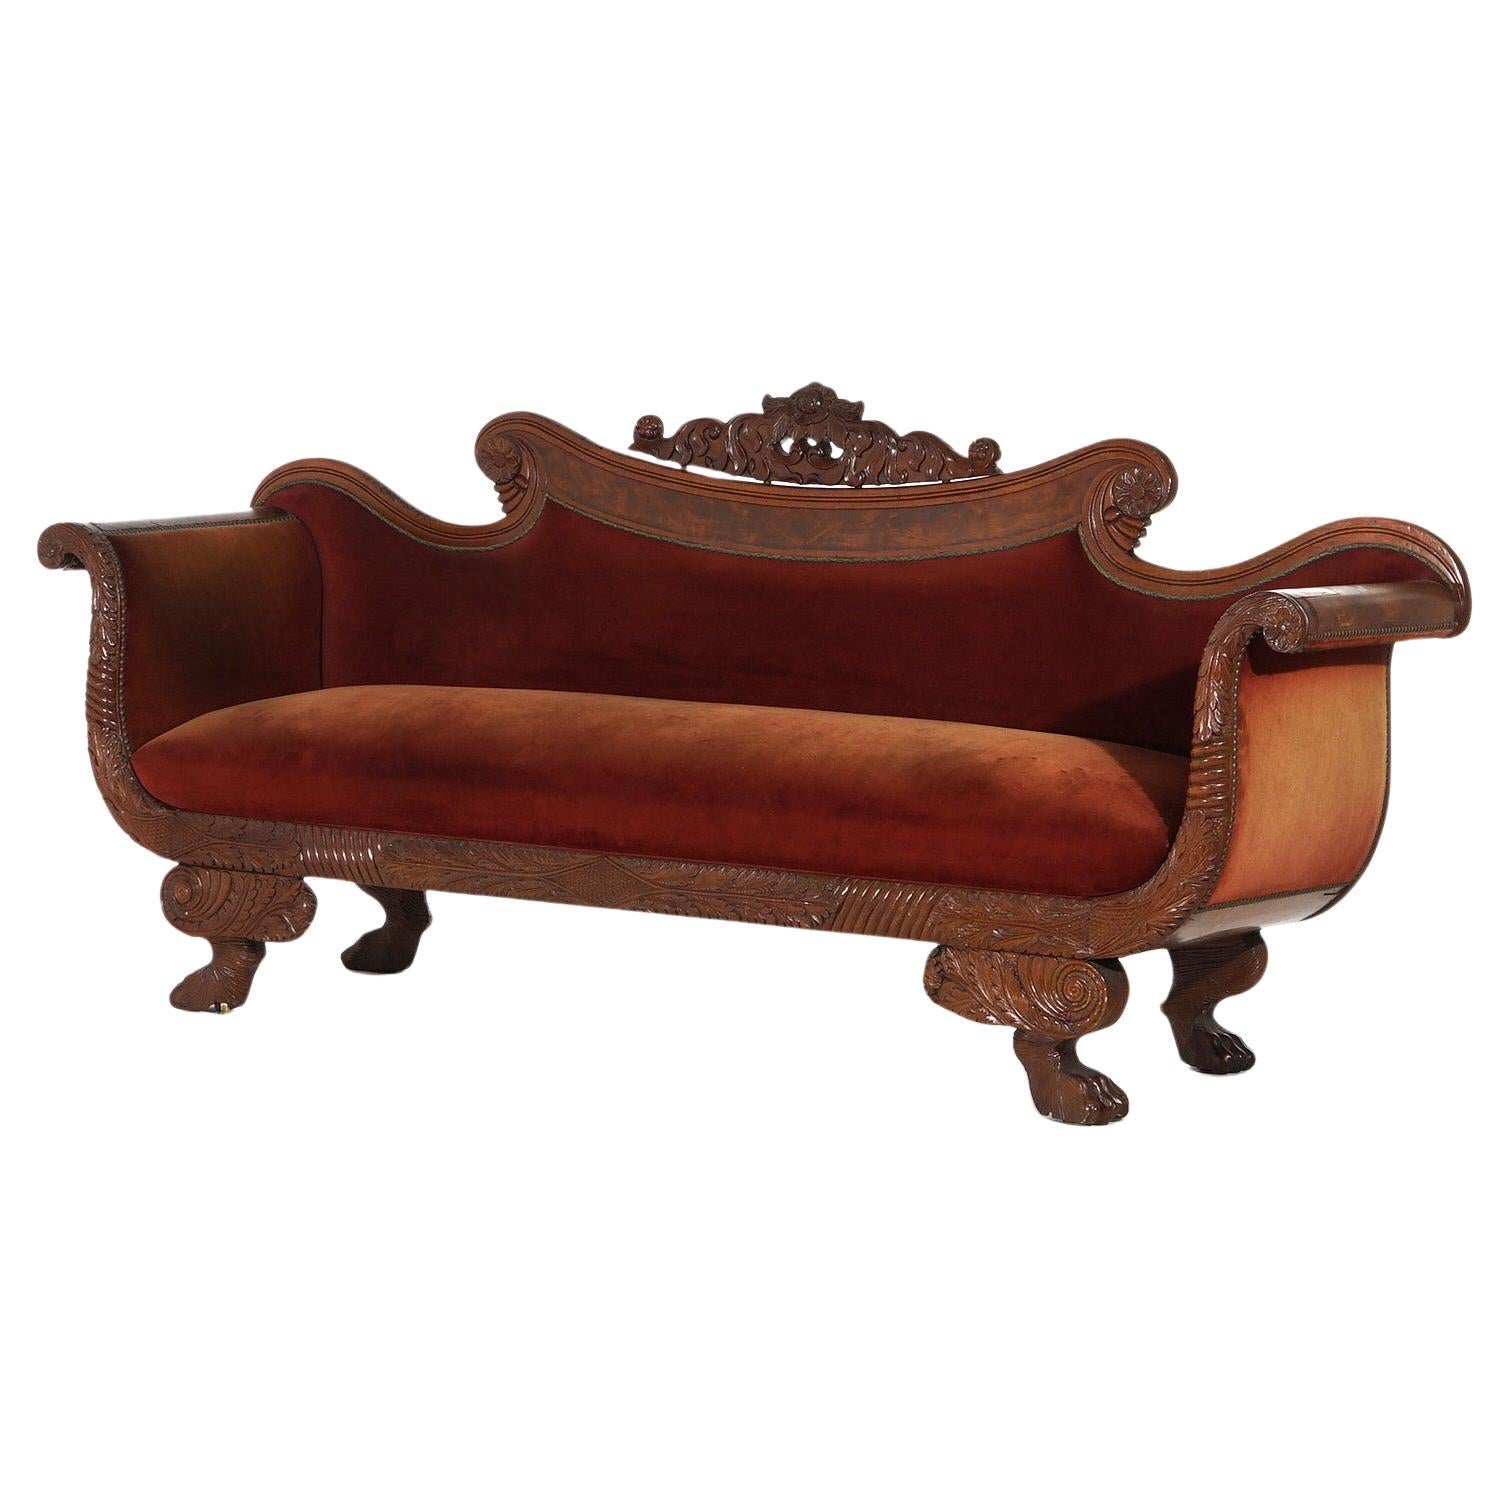 Antique Neoclassical American Empire Carved Walnut And Burl Sofa C1840 For Sale